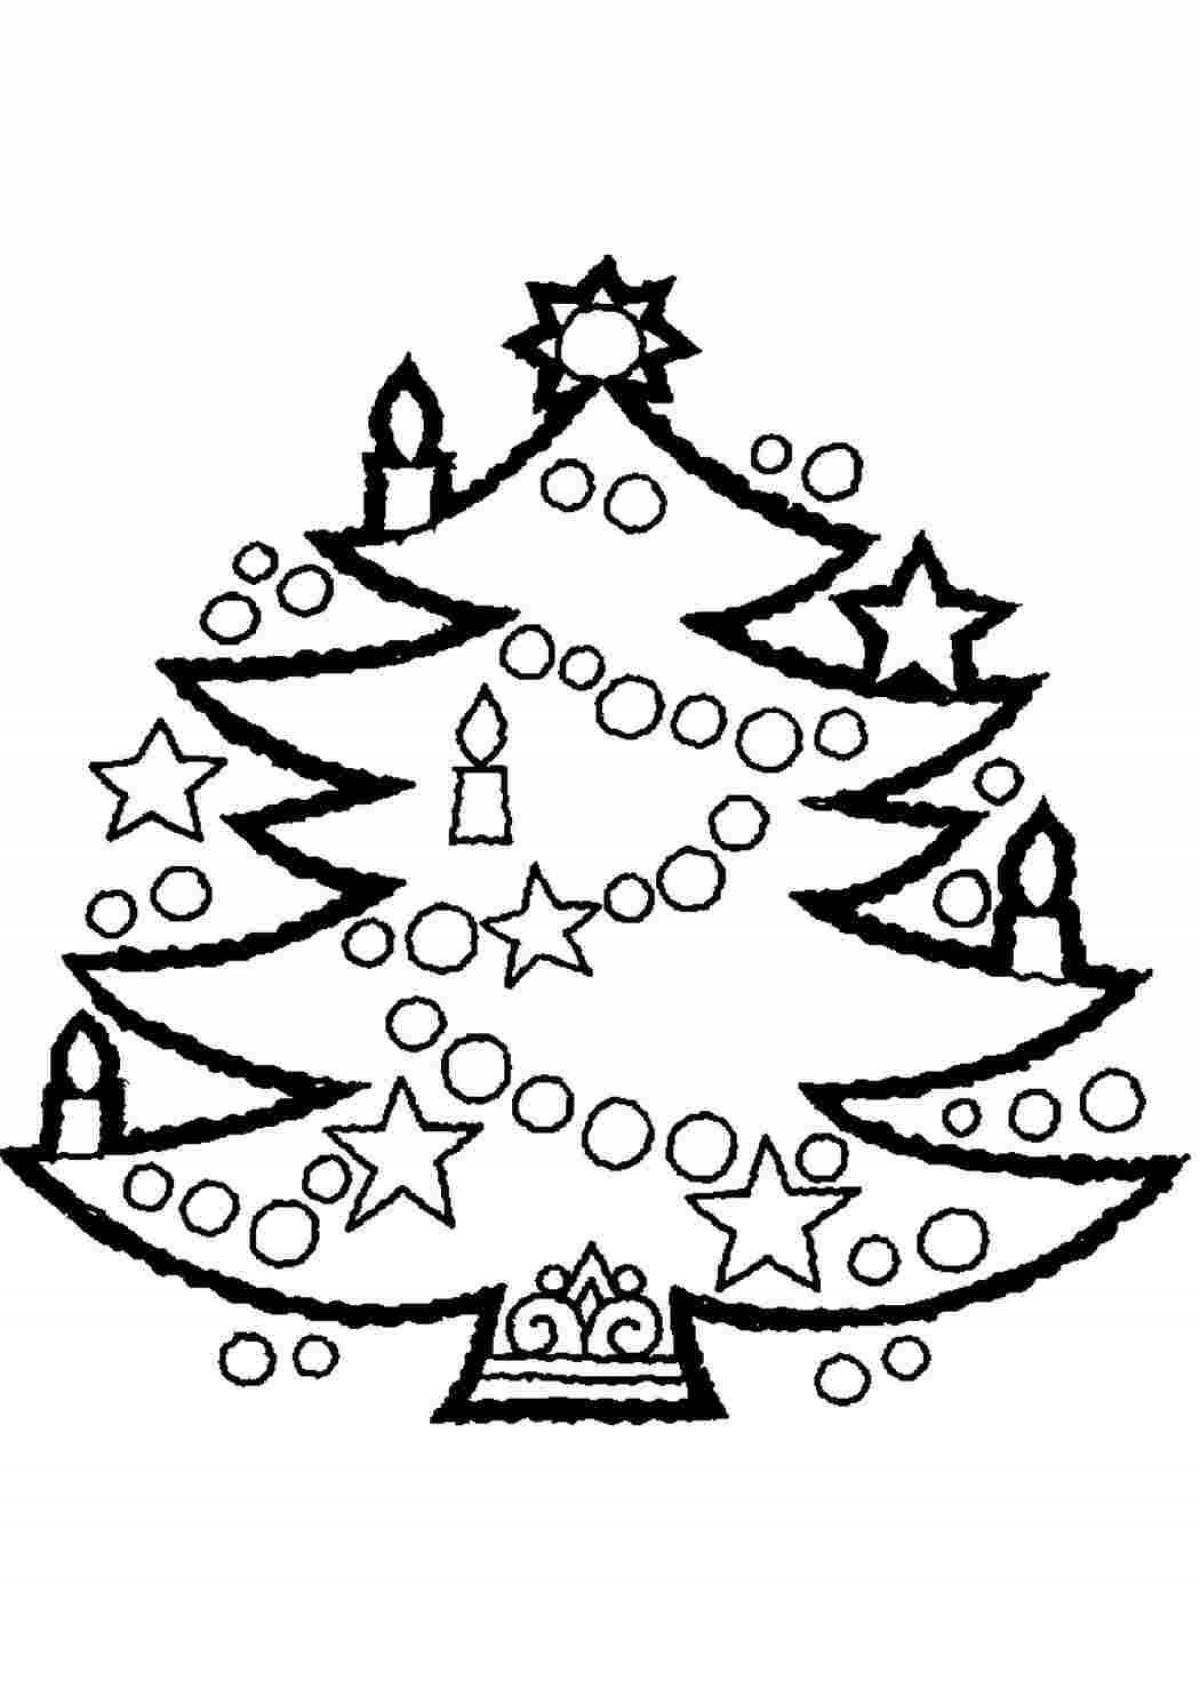 Exciting Christmas tree coloring book for kids